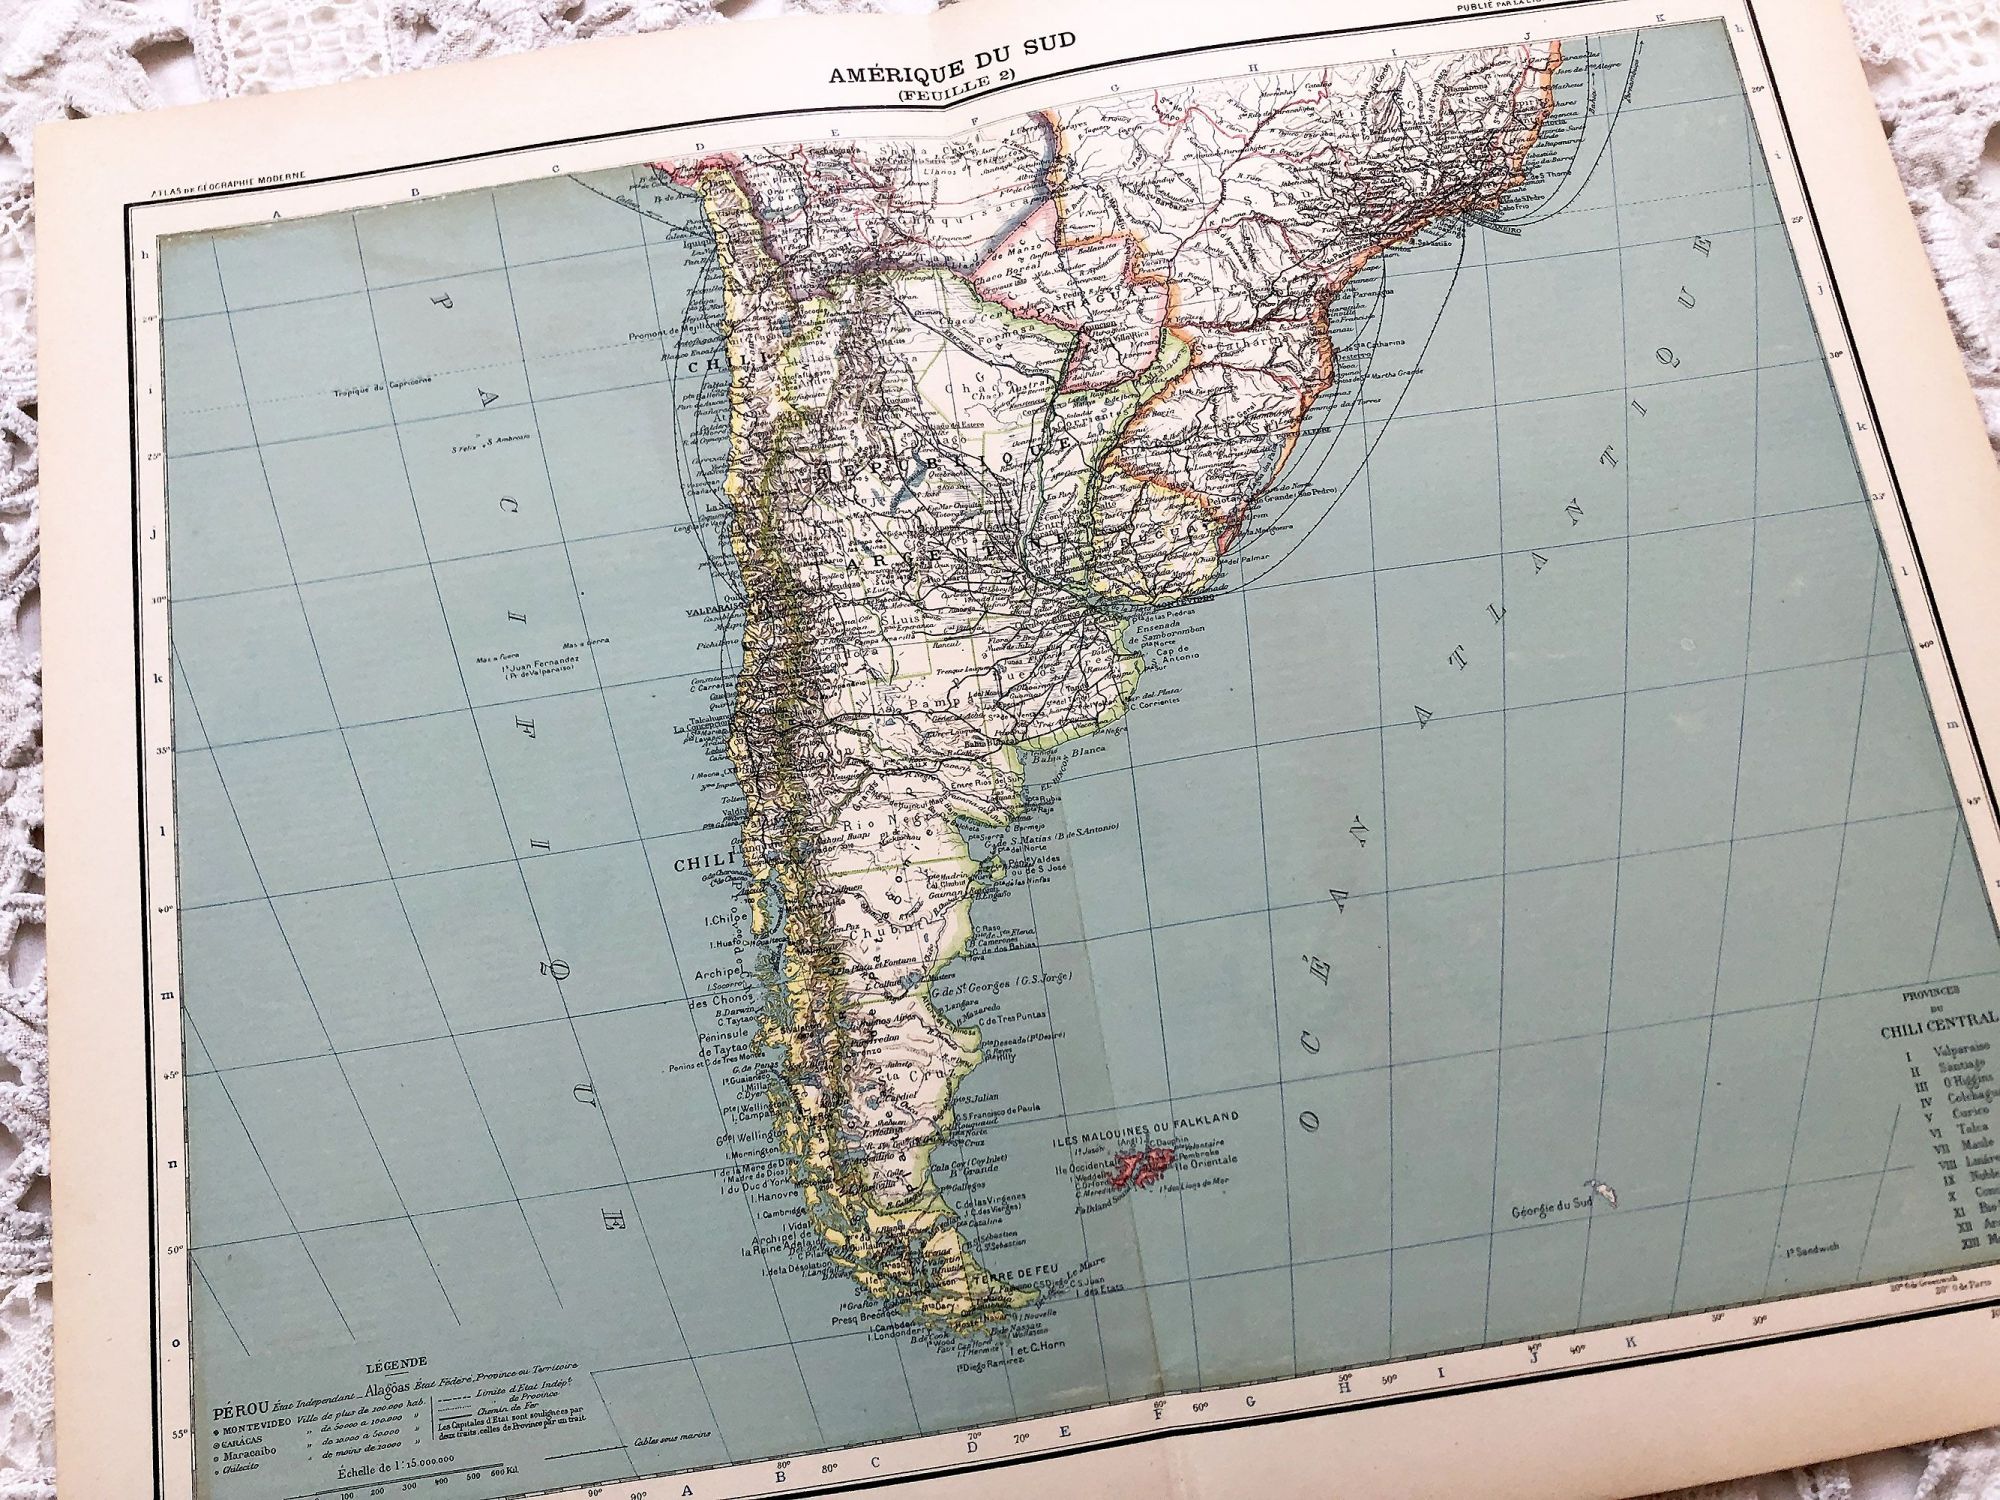 Large vintage map of southern South America (Chili, Brazil, Argentina) from a French atlas of the 1910s